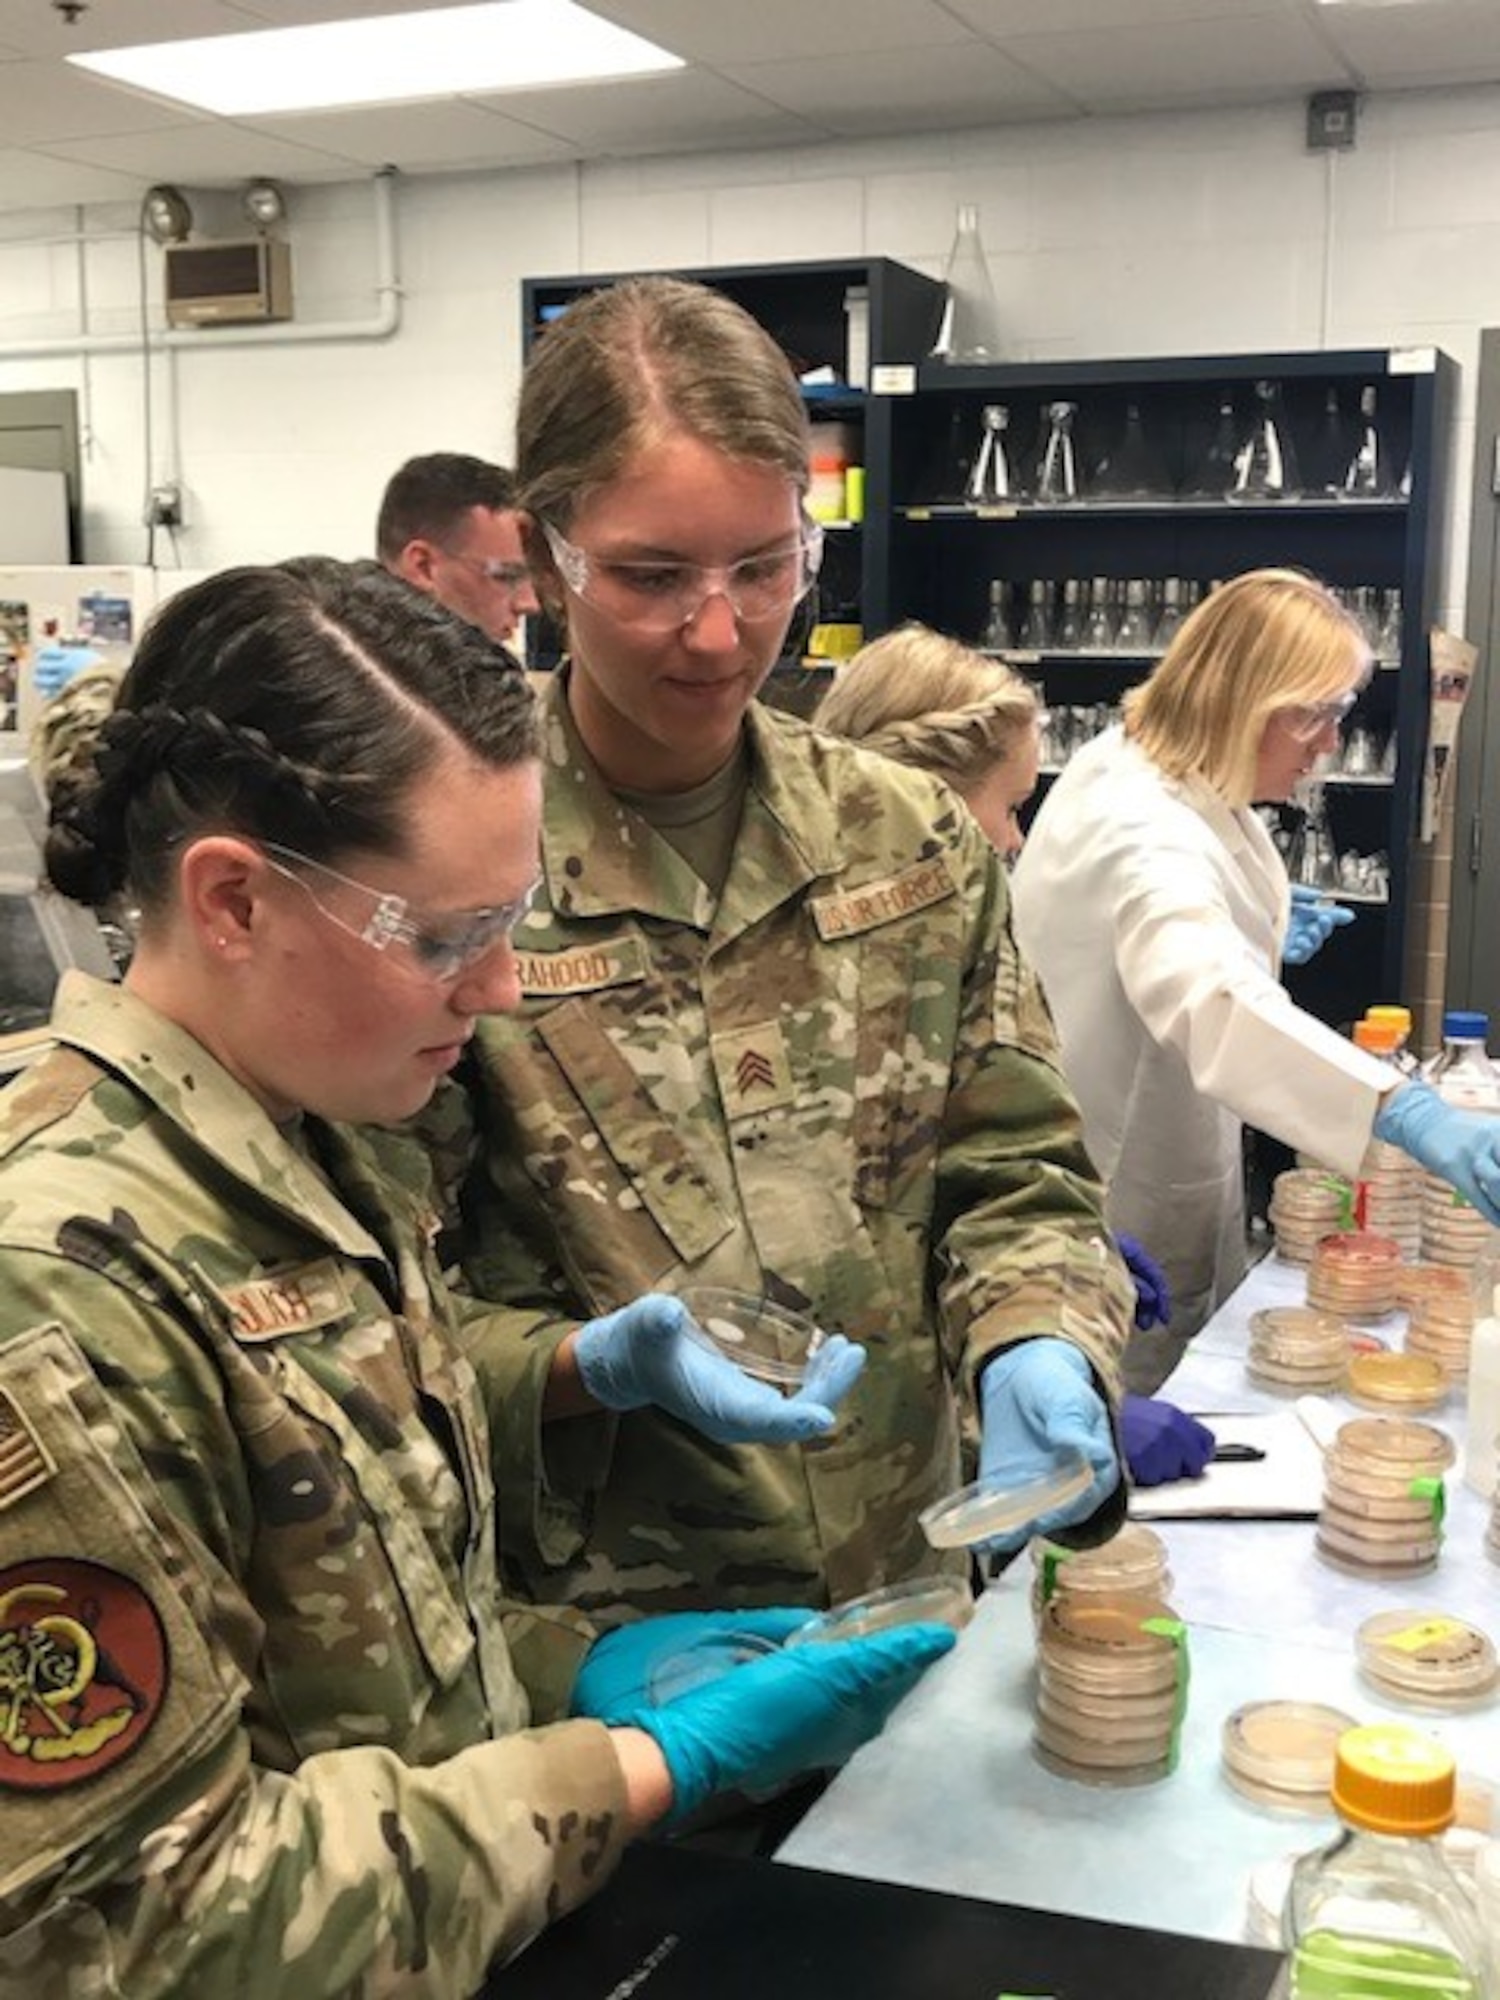 From left, U.S. Air Force Academy Cadets Julia Gundlach and Olivia Orahood, of O’Fallon, Illinois, and Alameda, California, respectively, study agar plates for bacteria colonies inside the Air Force Civil Engineer Center Readiness Laboratory at Tyndall Air Force Base, Florida.